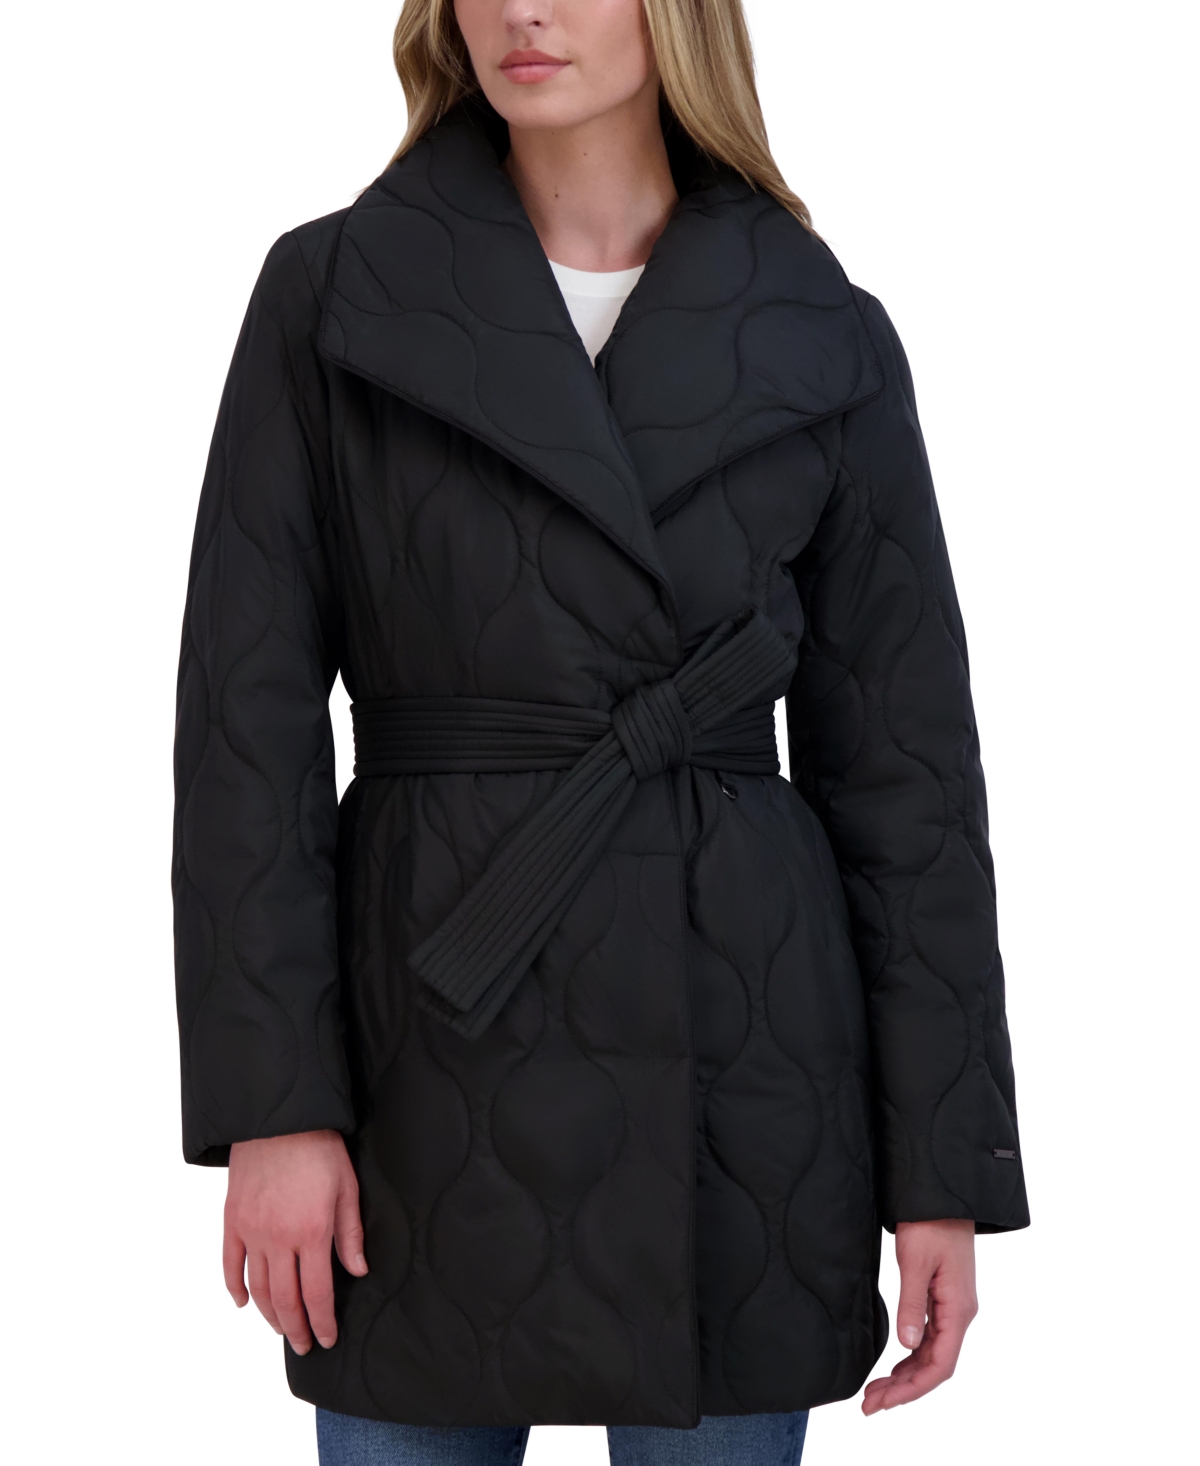 Women's Belted Asymmetrical Quilted Coat - Navy